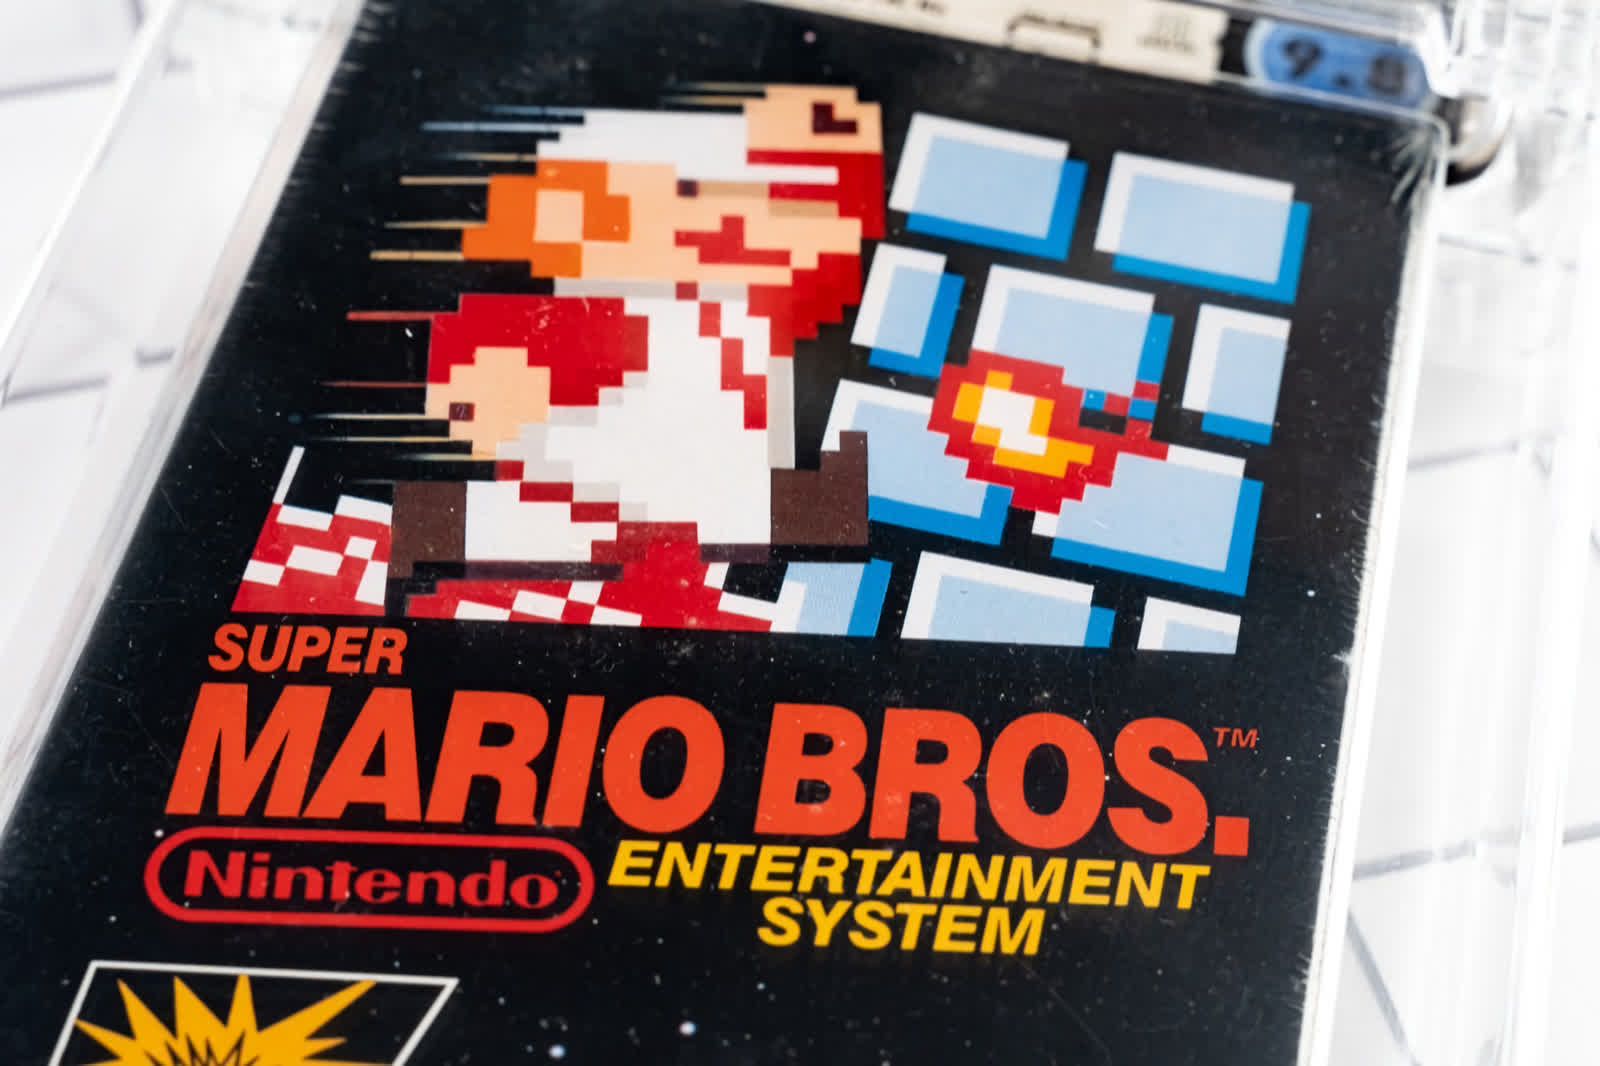 Someone just paid $2 million for a sealed copy of Super Mario Bros.